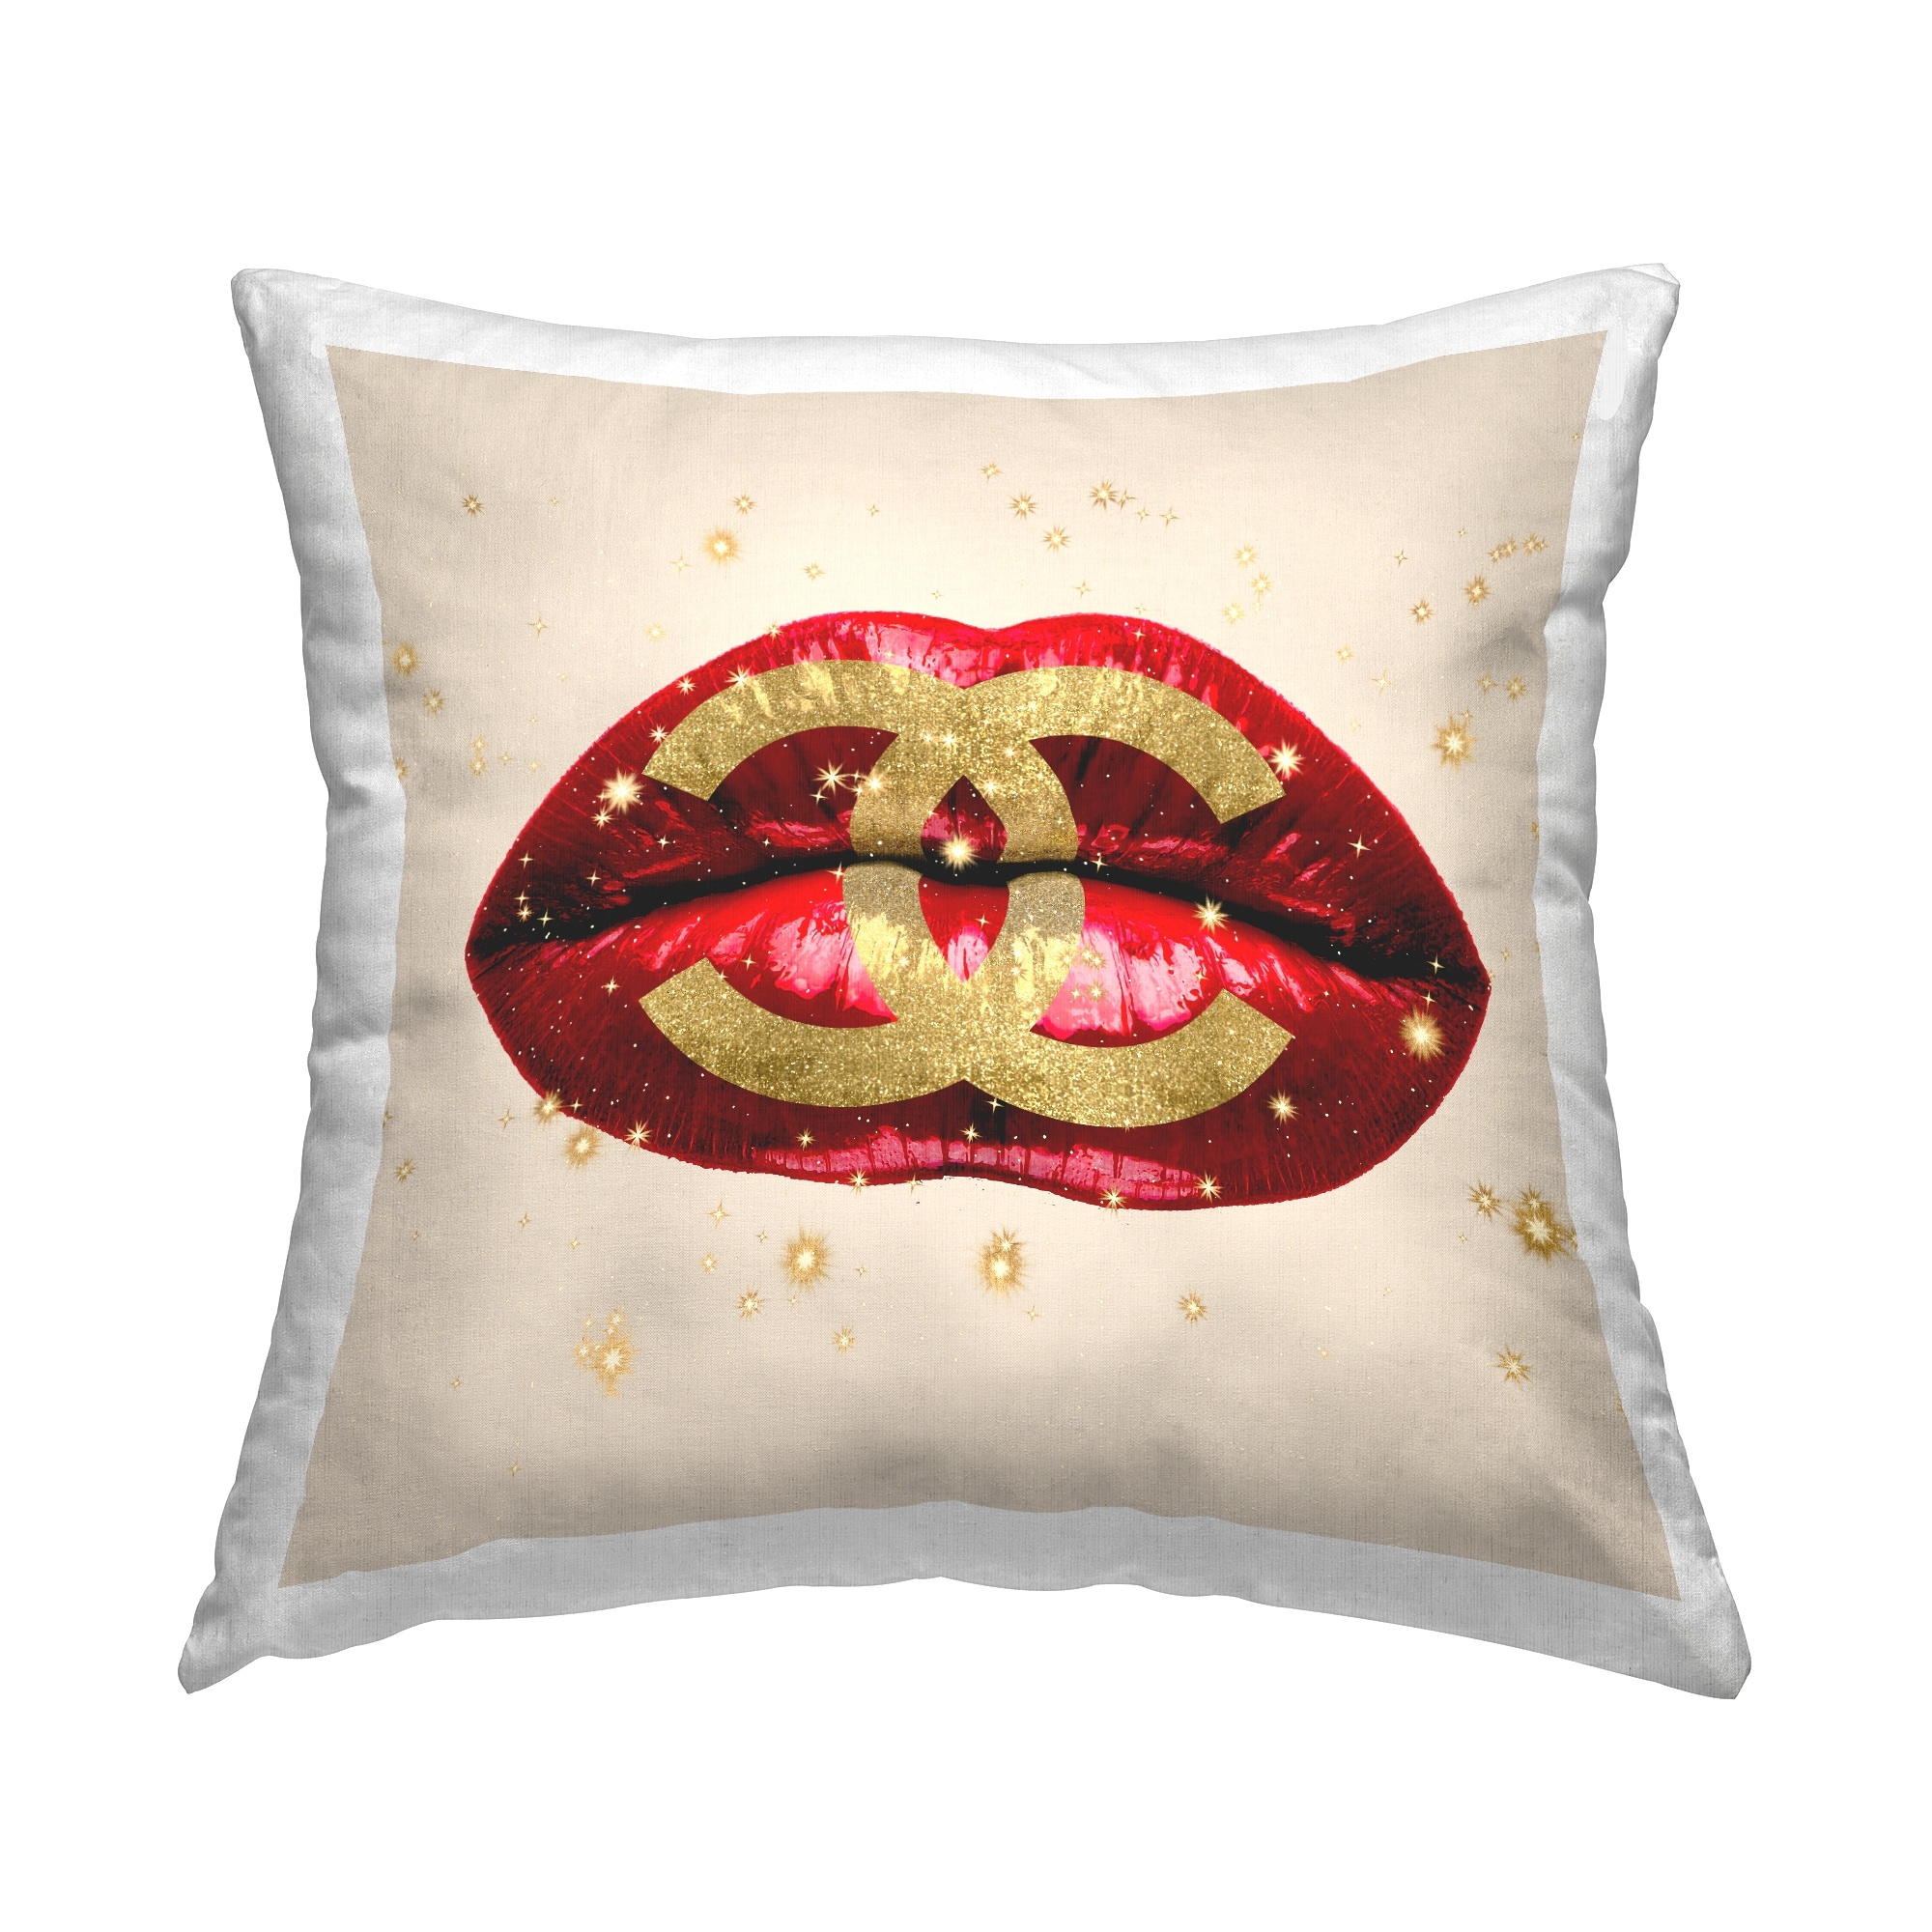 Stupell Industries Bold Red Lips Chic Fashion Brand Printed Throw